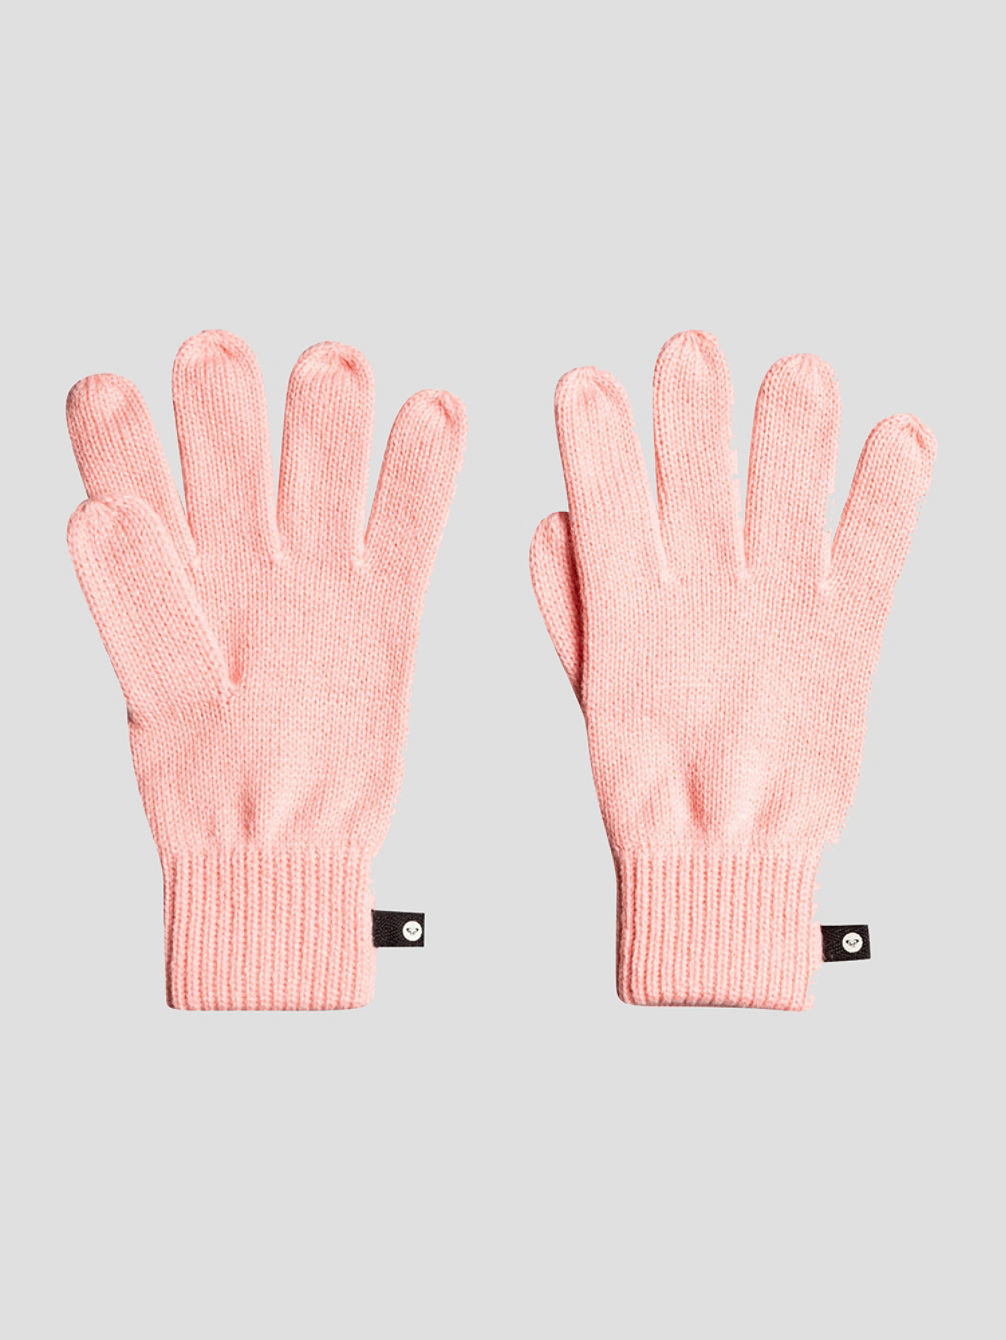 Patch Cake Gloves